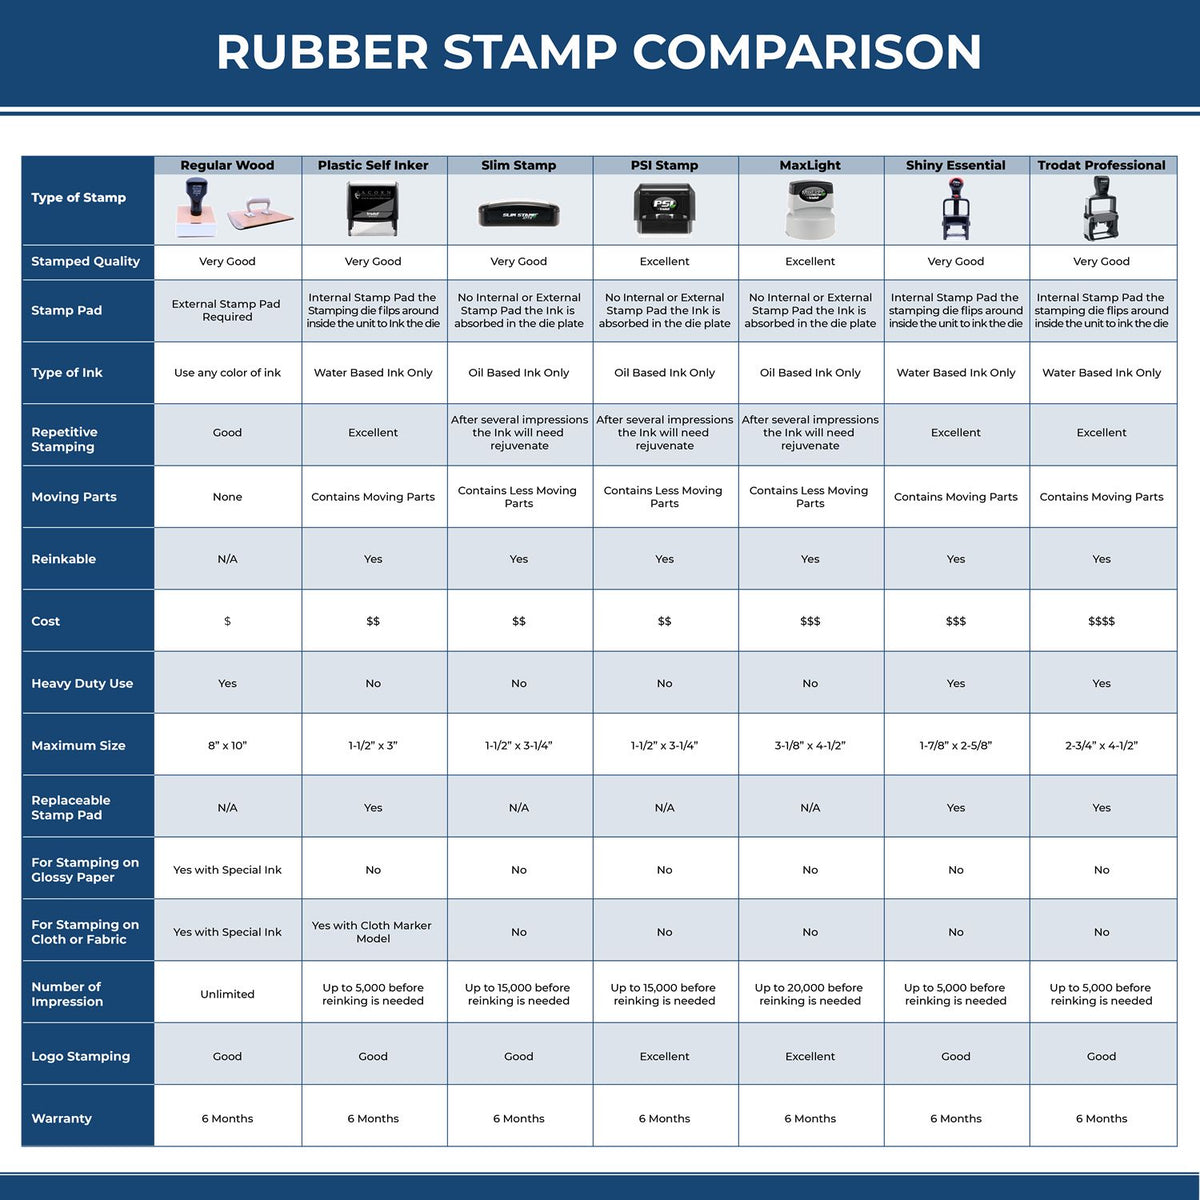 Much Better Keep Trying Rubber Stamp 4782R Rubber Stamp Comparison